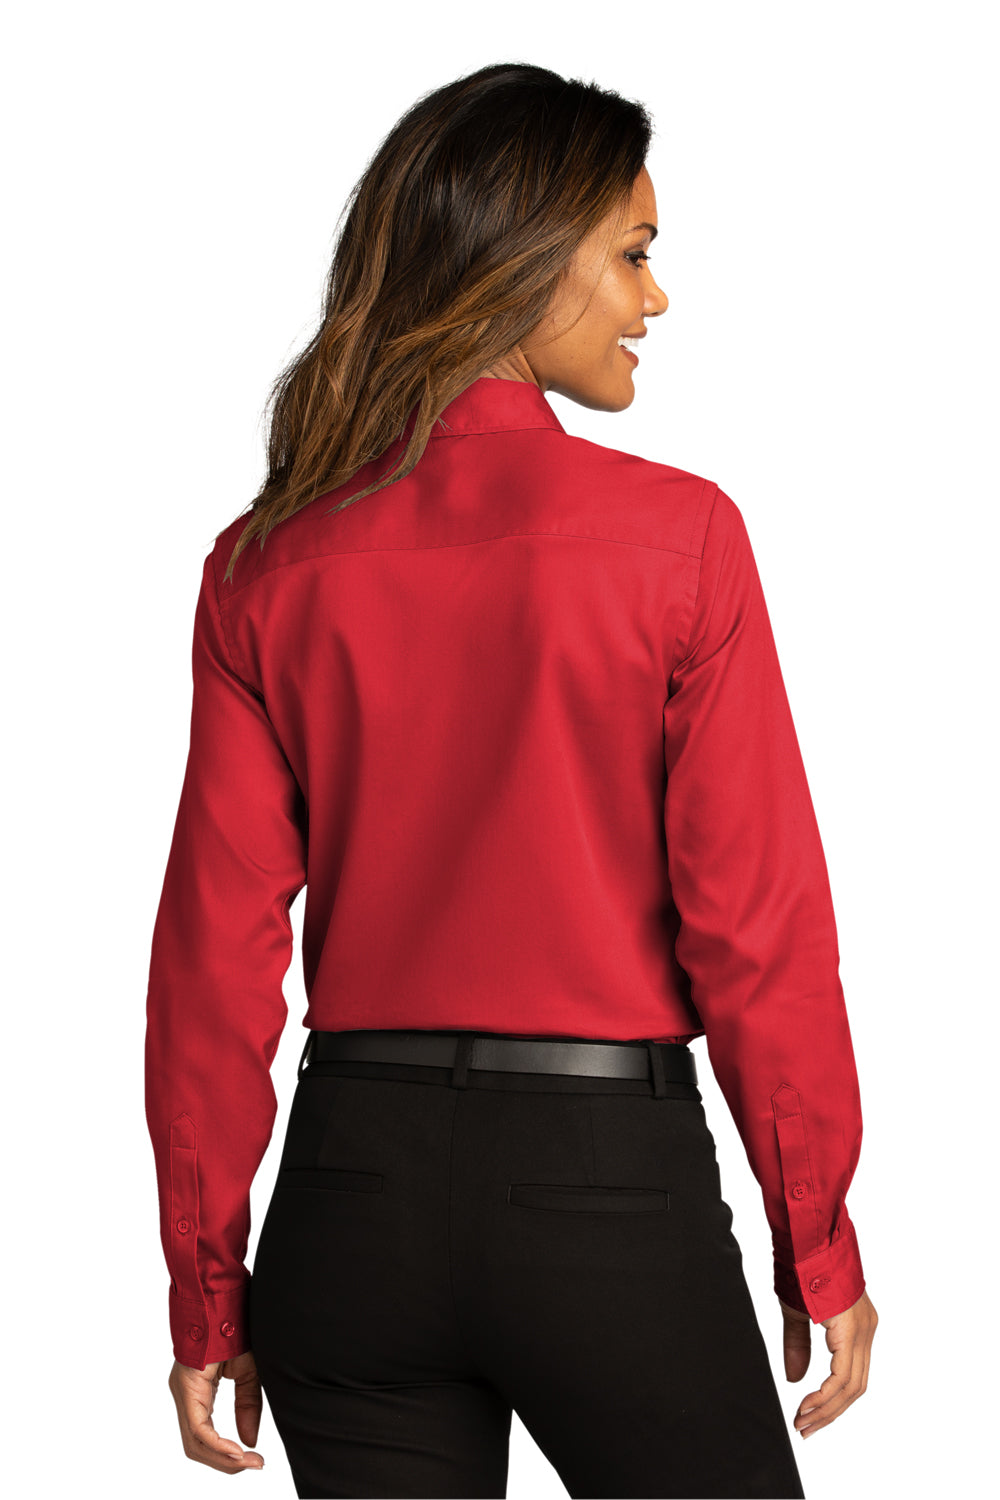 Port Authority Womens SuperPro React Long Sleeve Button Down Shirt Rich Red Side